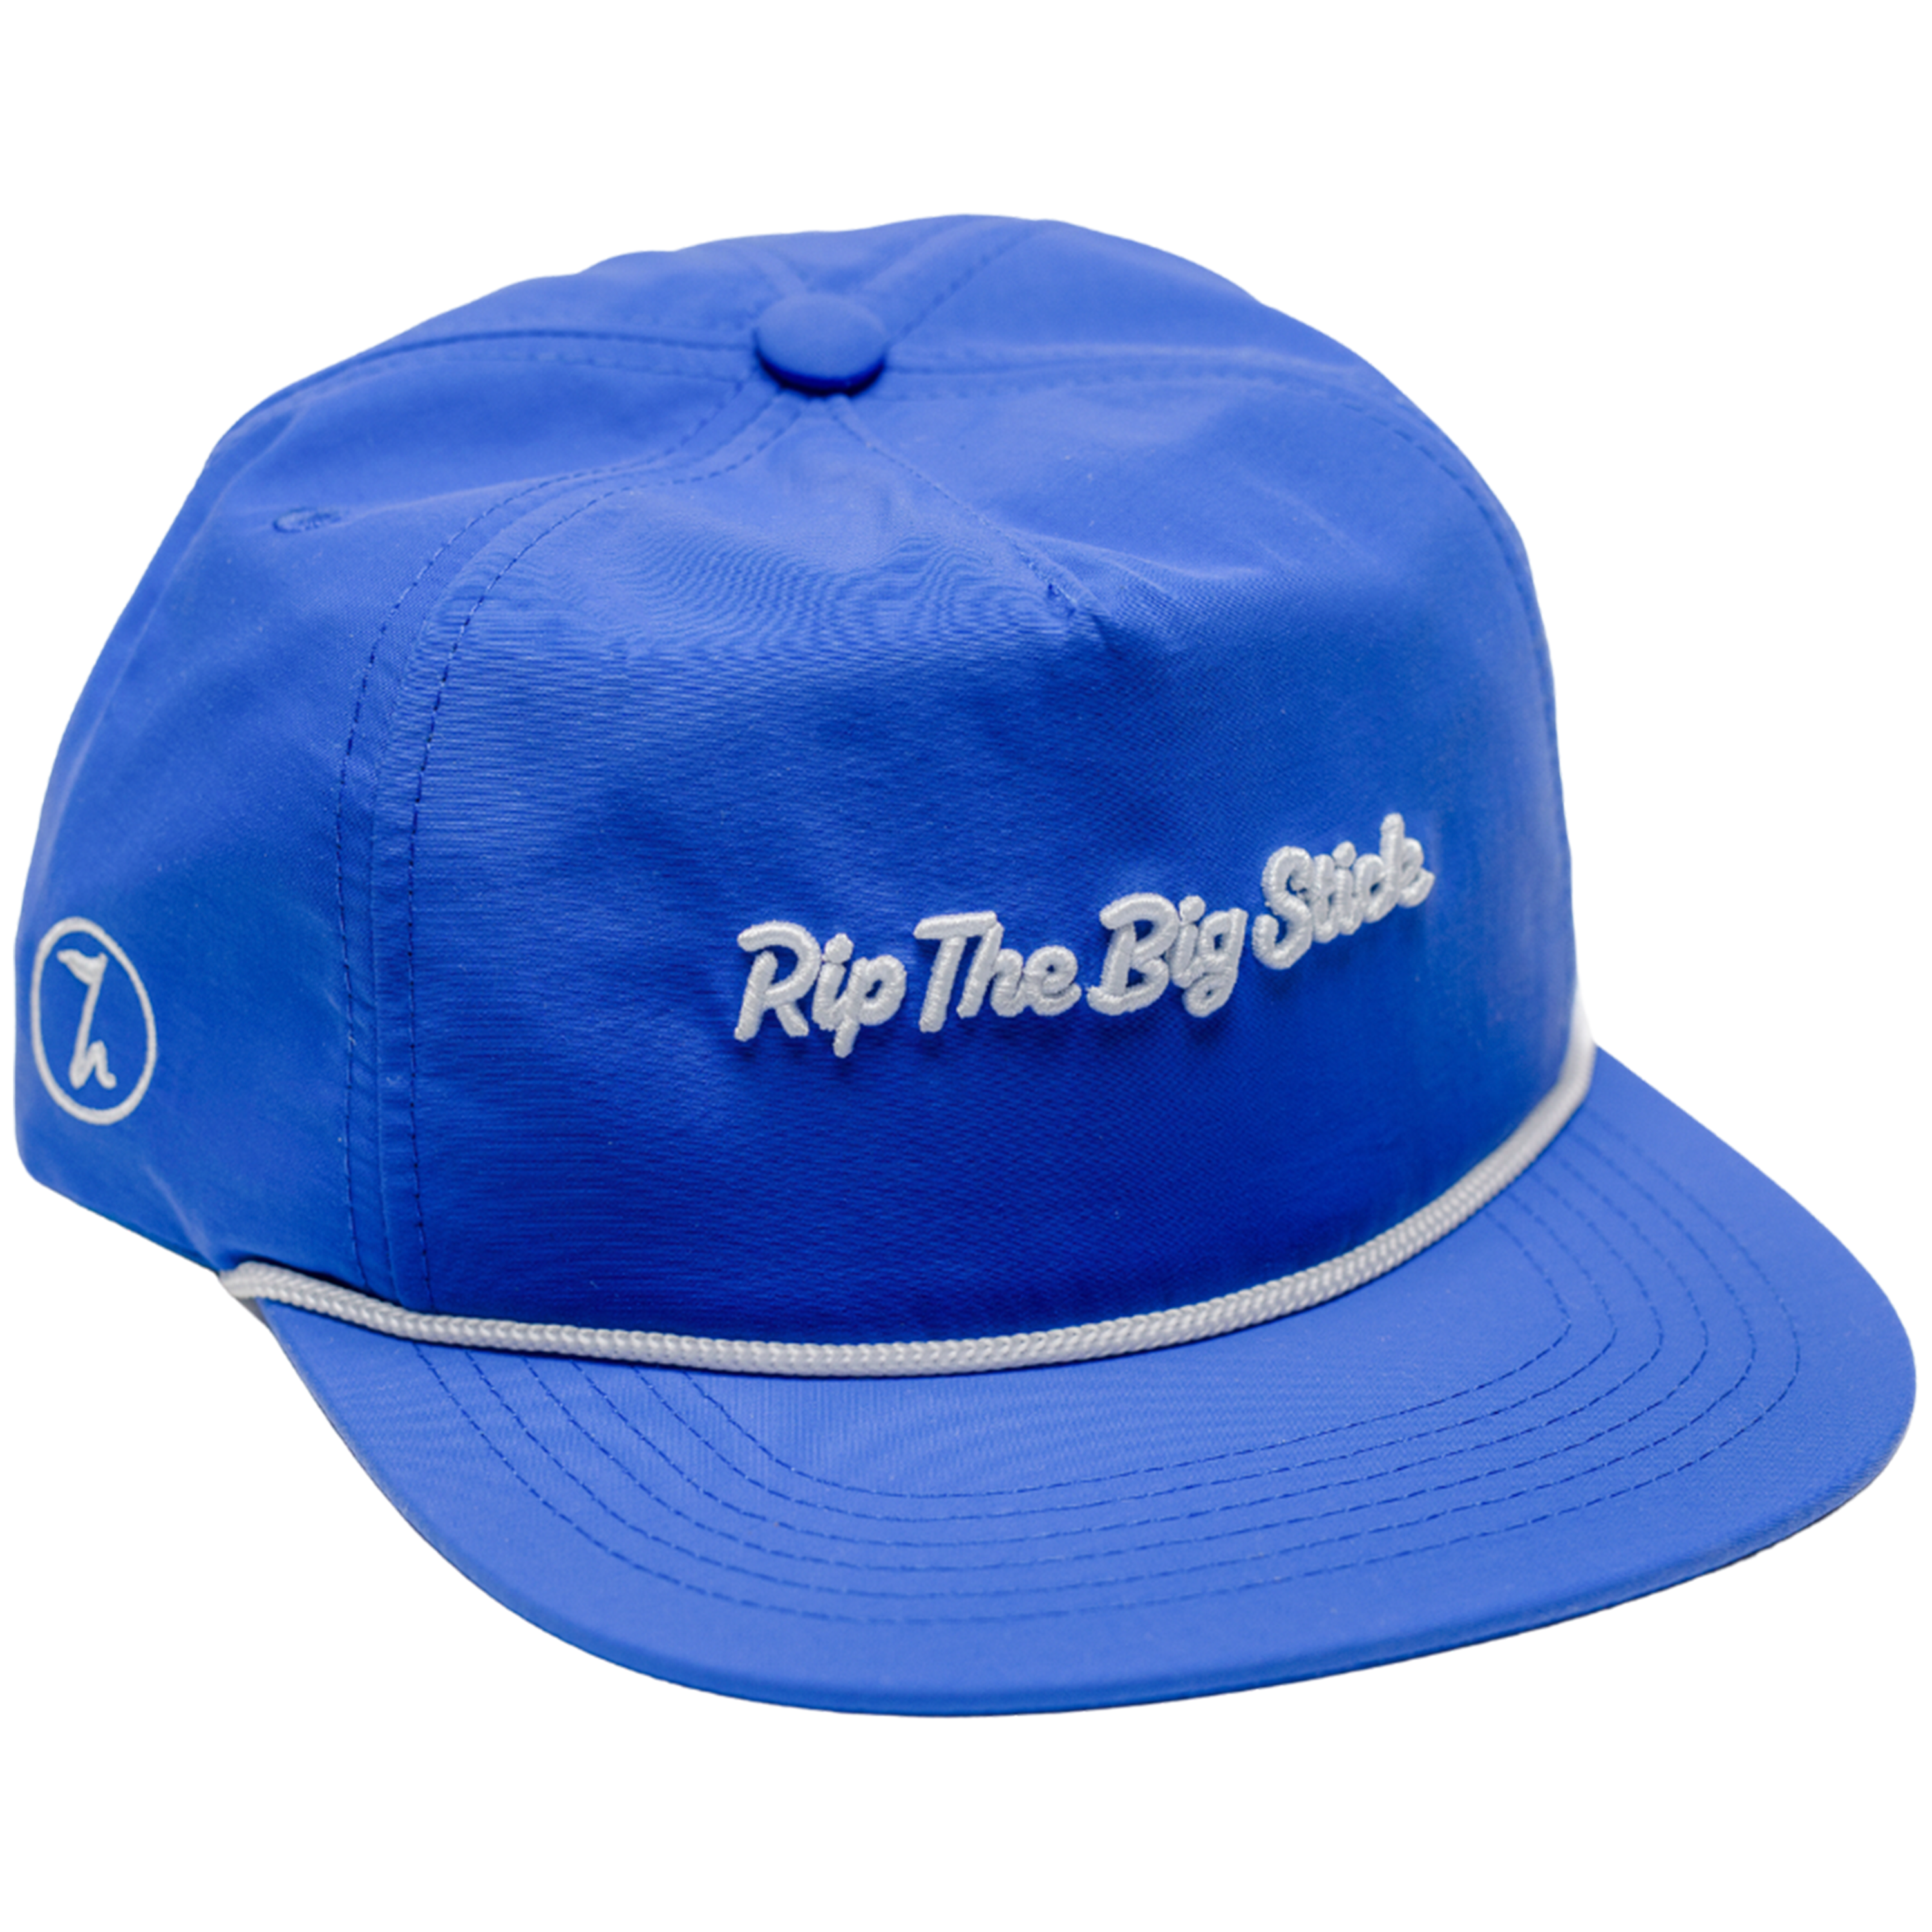 Hickory Apparel 'Rip The Big Stick' Rope Hat Blue/White